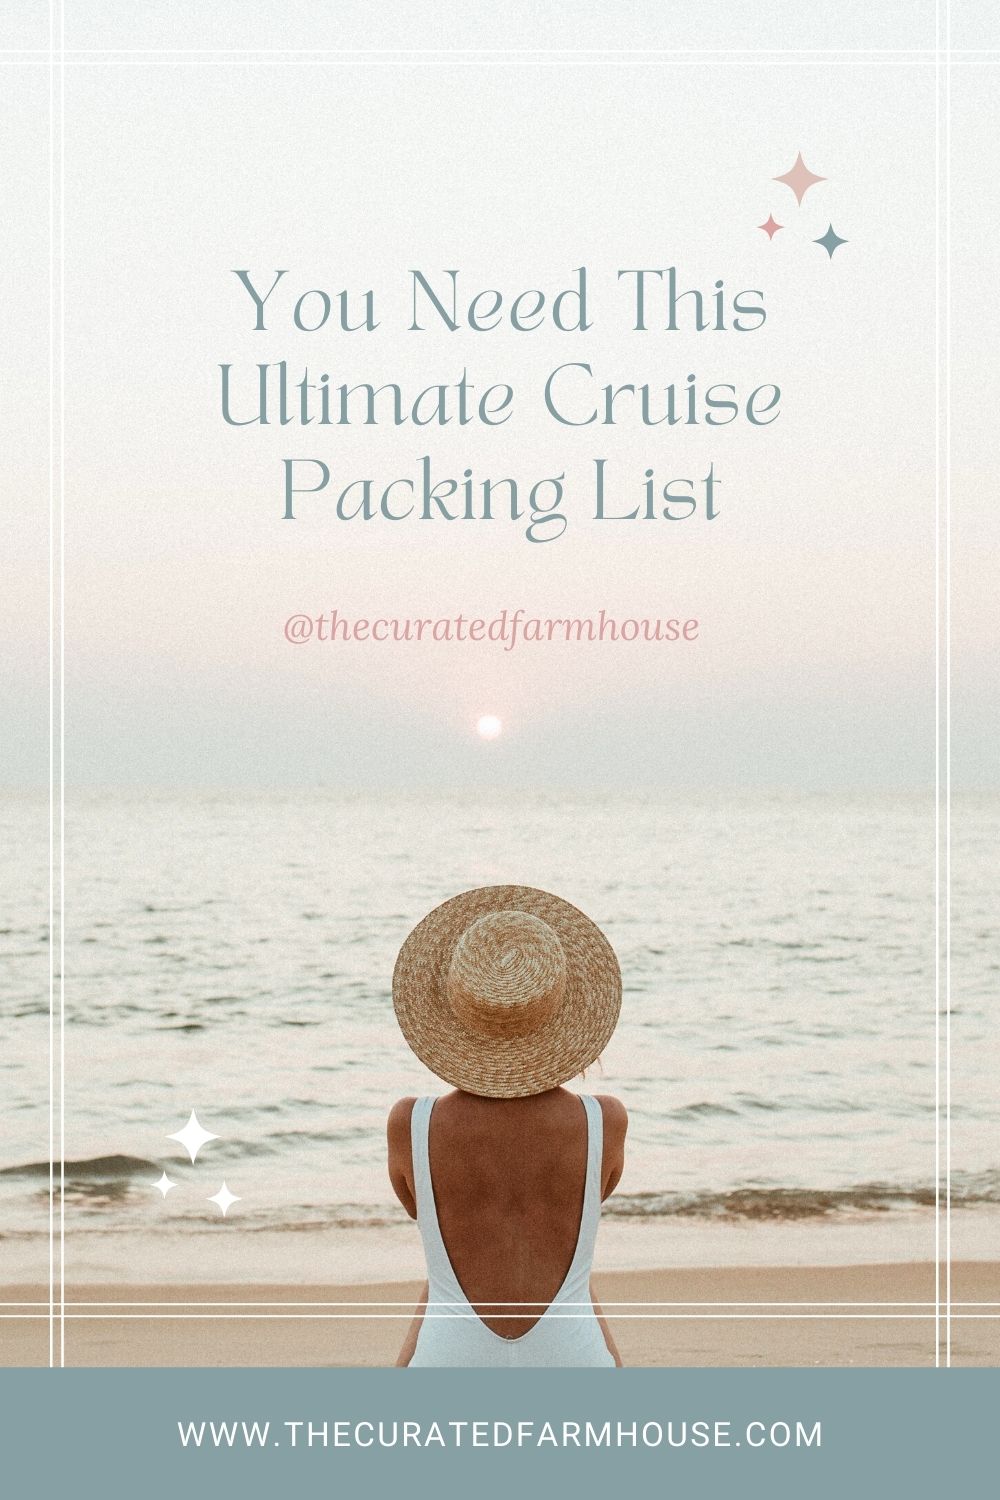 You Need This Ultimate Cruise Packing List